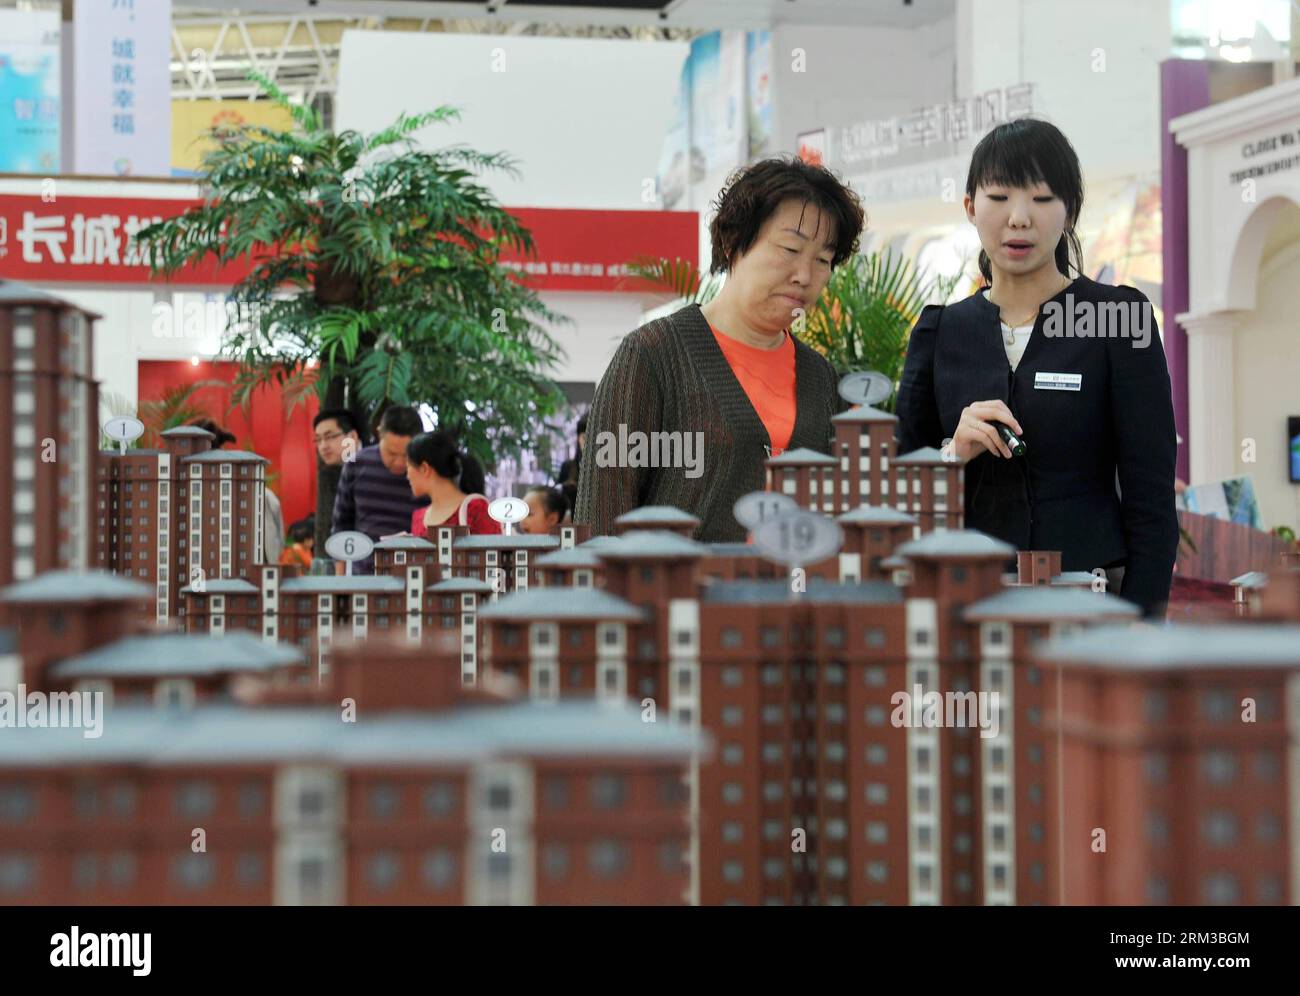 Bildnummer: 60126839  Datum: 01.05.2013  Copyright: imago/Xinhua Photo taken on May 1, 2013 shows a visitor consulting the information of commercial residential buildings which are on sale in Yinchuan City, Ningxia Hui Autonomous Region.   (Xinhua/Peng Zhaozhi)(mp) CHINA-GDP-GROWTH (CN) PUBLICATIONxNOTxINxCHN Wirtschaft x2x xsk 2013 quer o0 Immobilien Verkauf     60126839 Date 01 05 2013 Copyright Imago XINHUA Photo Taken ON May 1 2013 Shows a Visitor Consulting The Information of Commercial Residential Buildings Which are ON Sale in Yinchuan City Ningxia Hui Autonomous Region XINHUA Peng Zhao Stock Photo